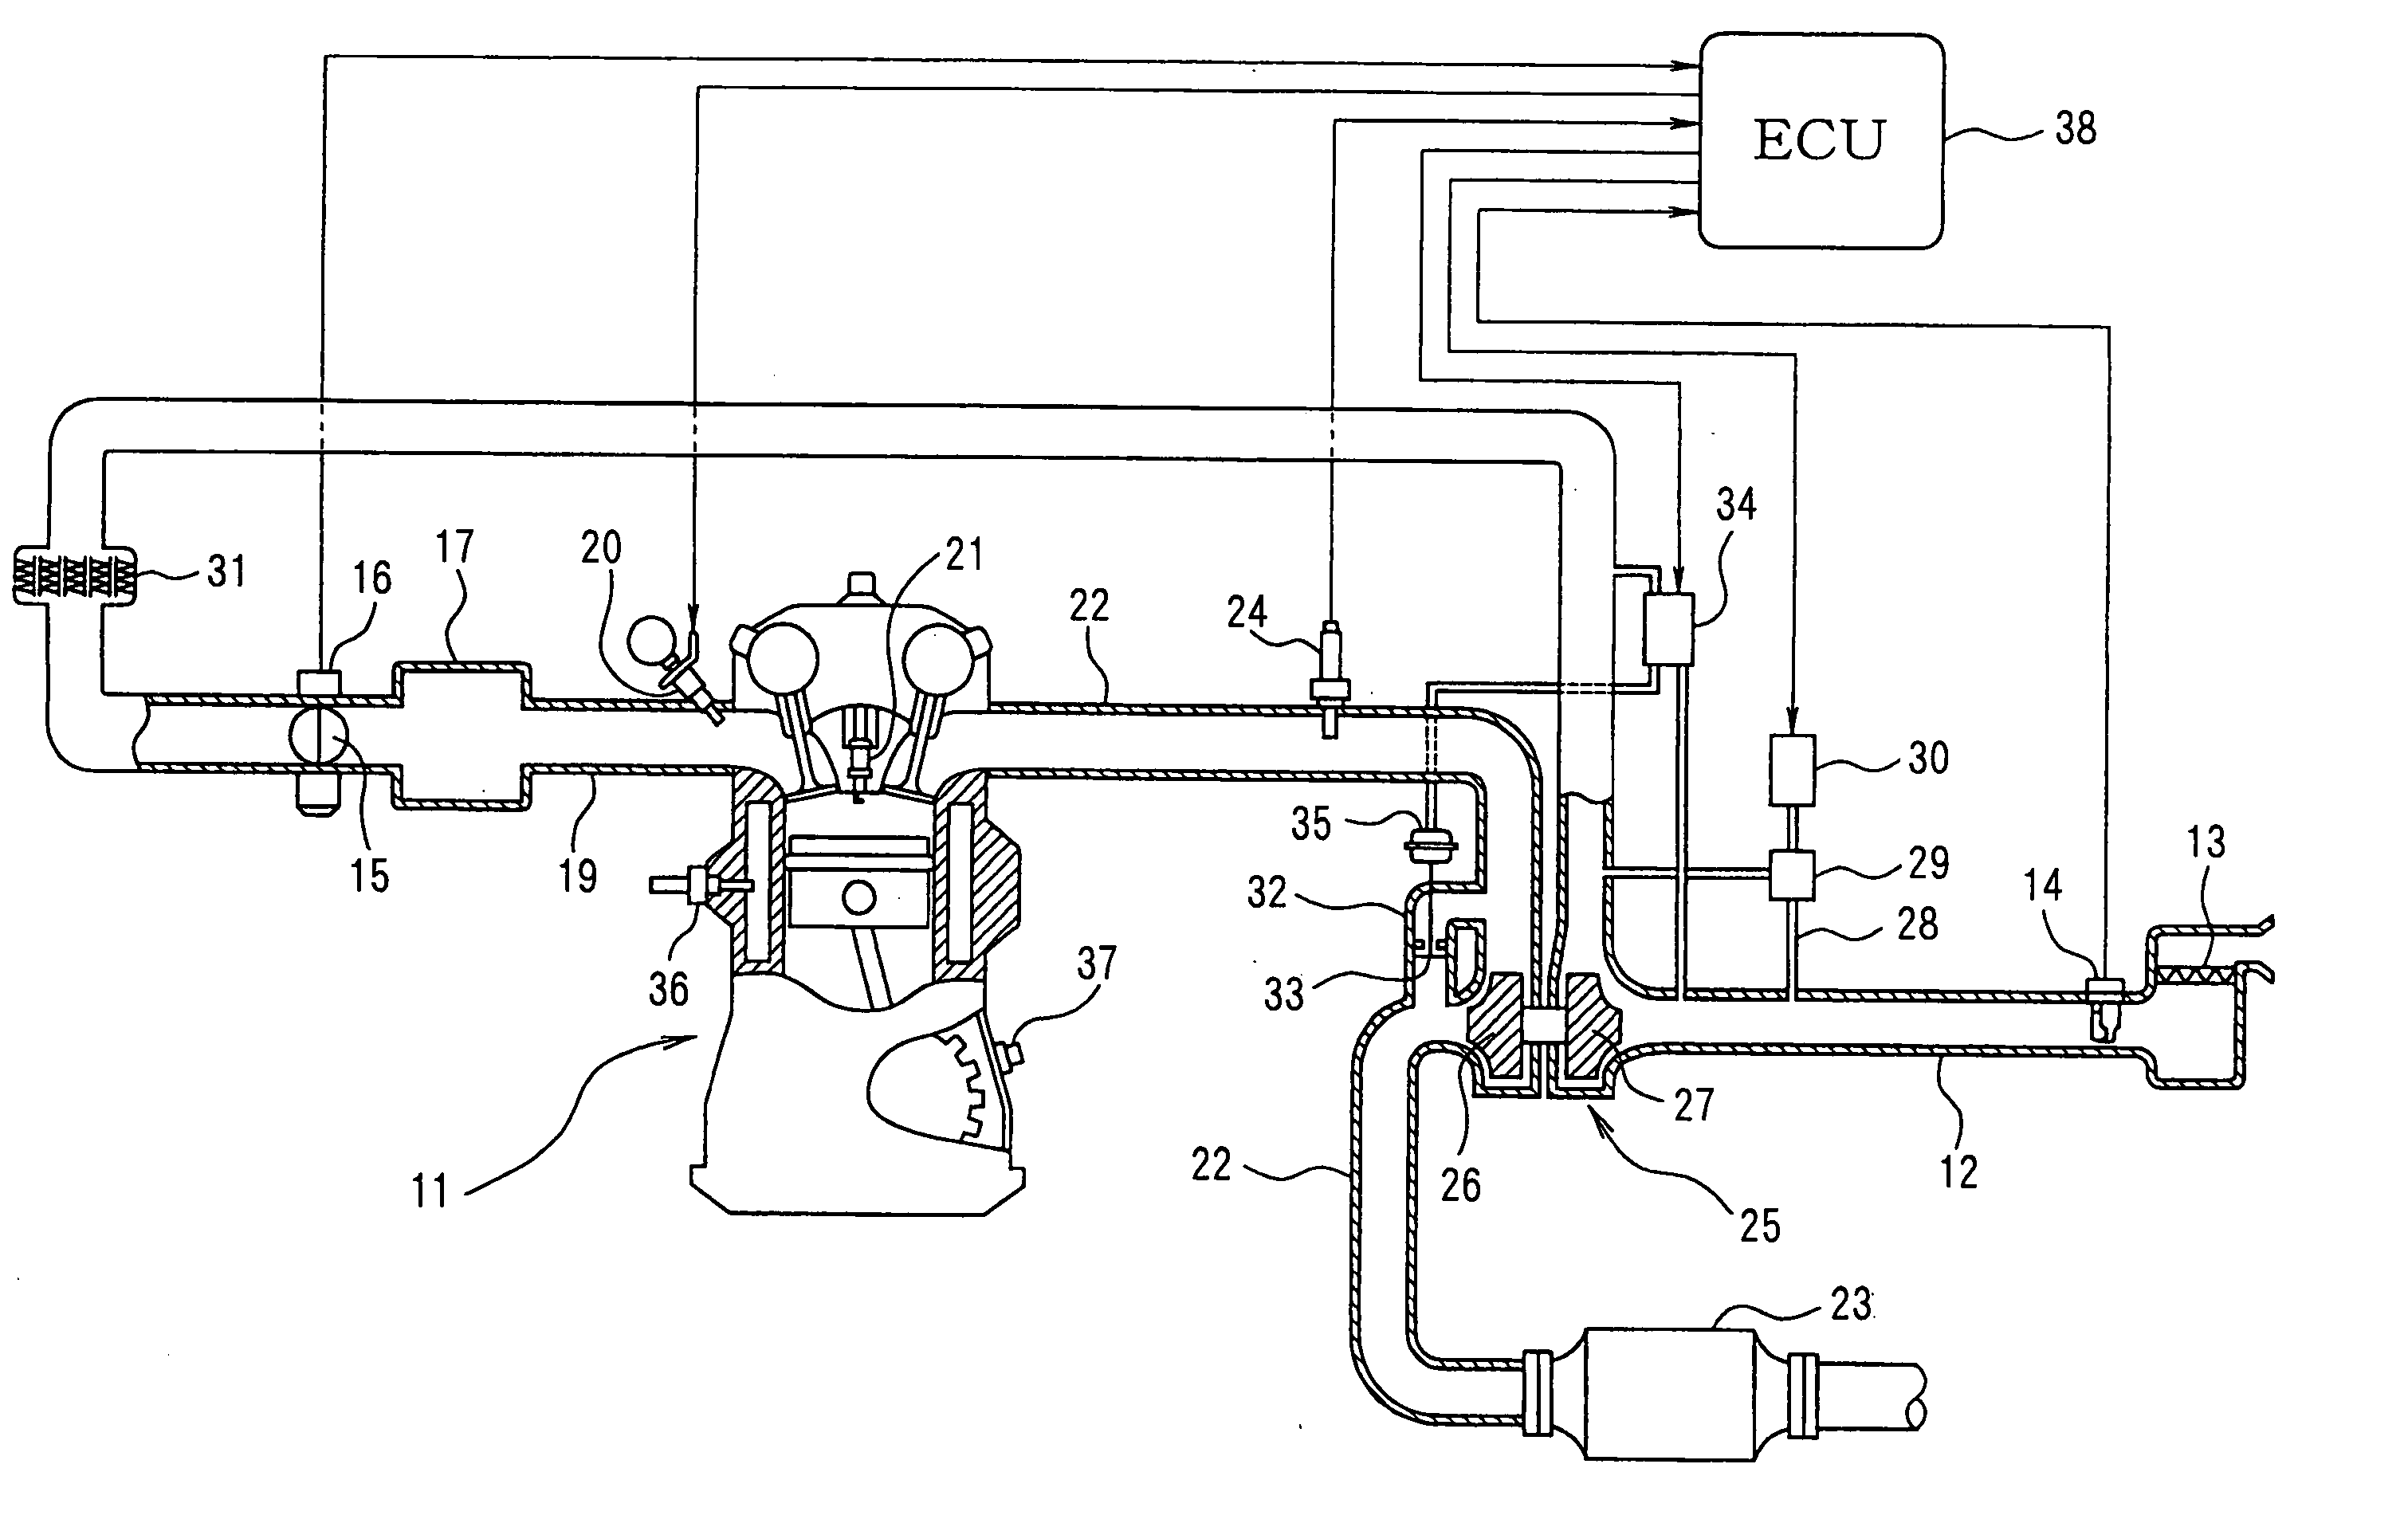 Boost pressure estimation apparatus for internal combustion engine with supercharger